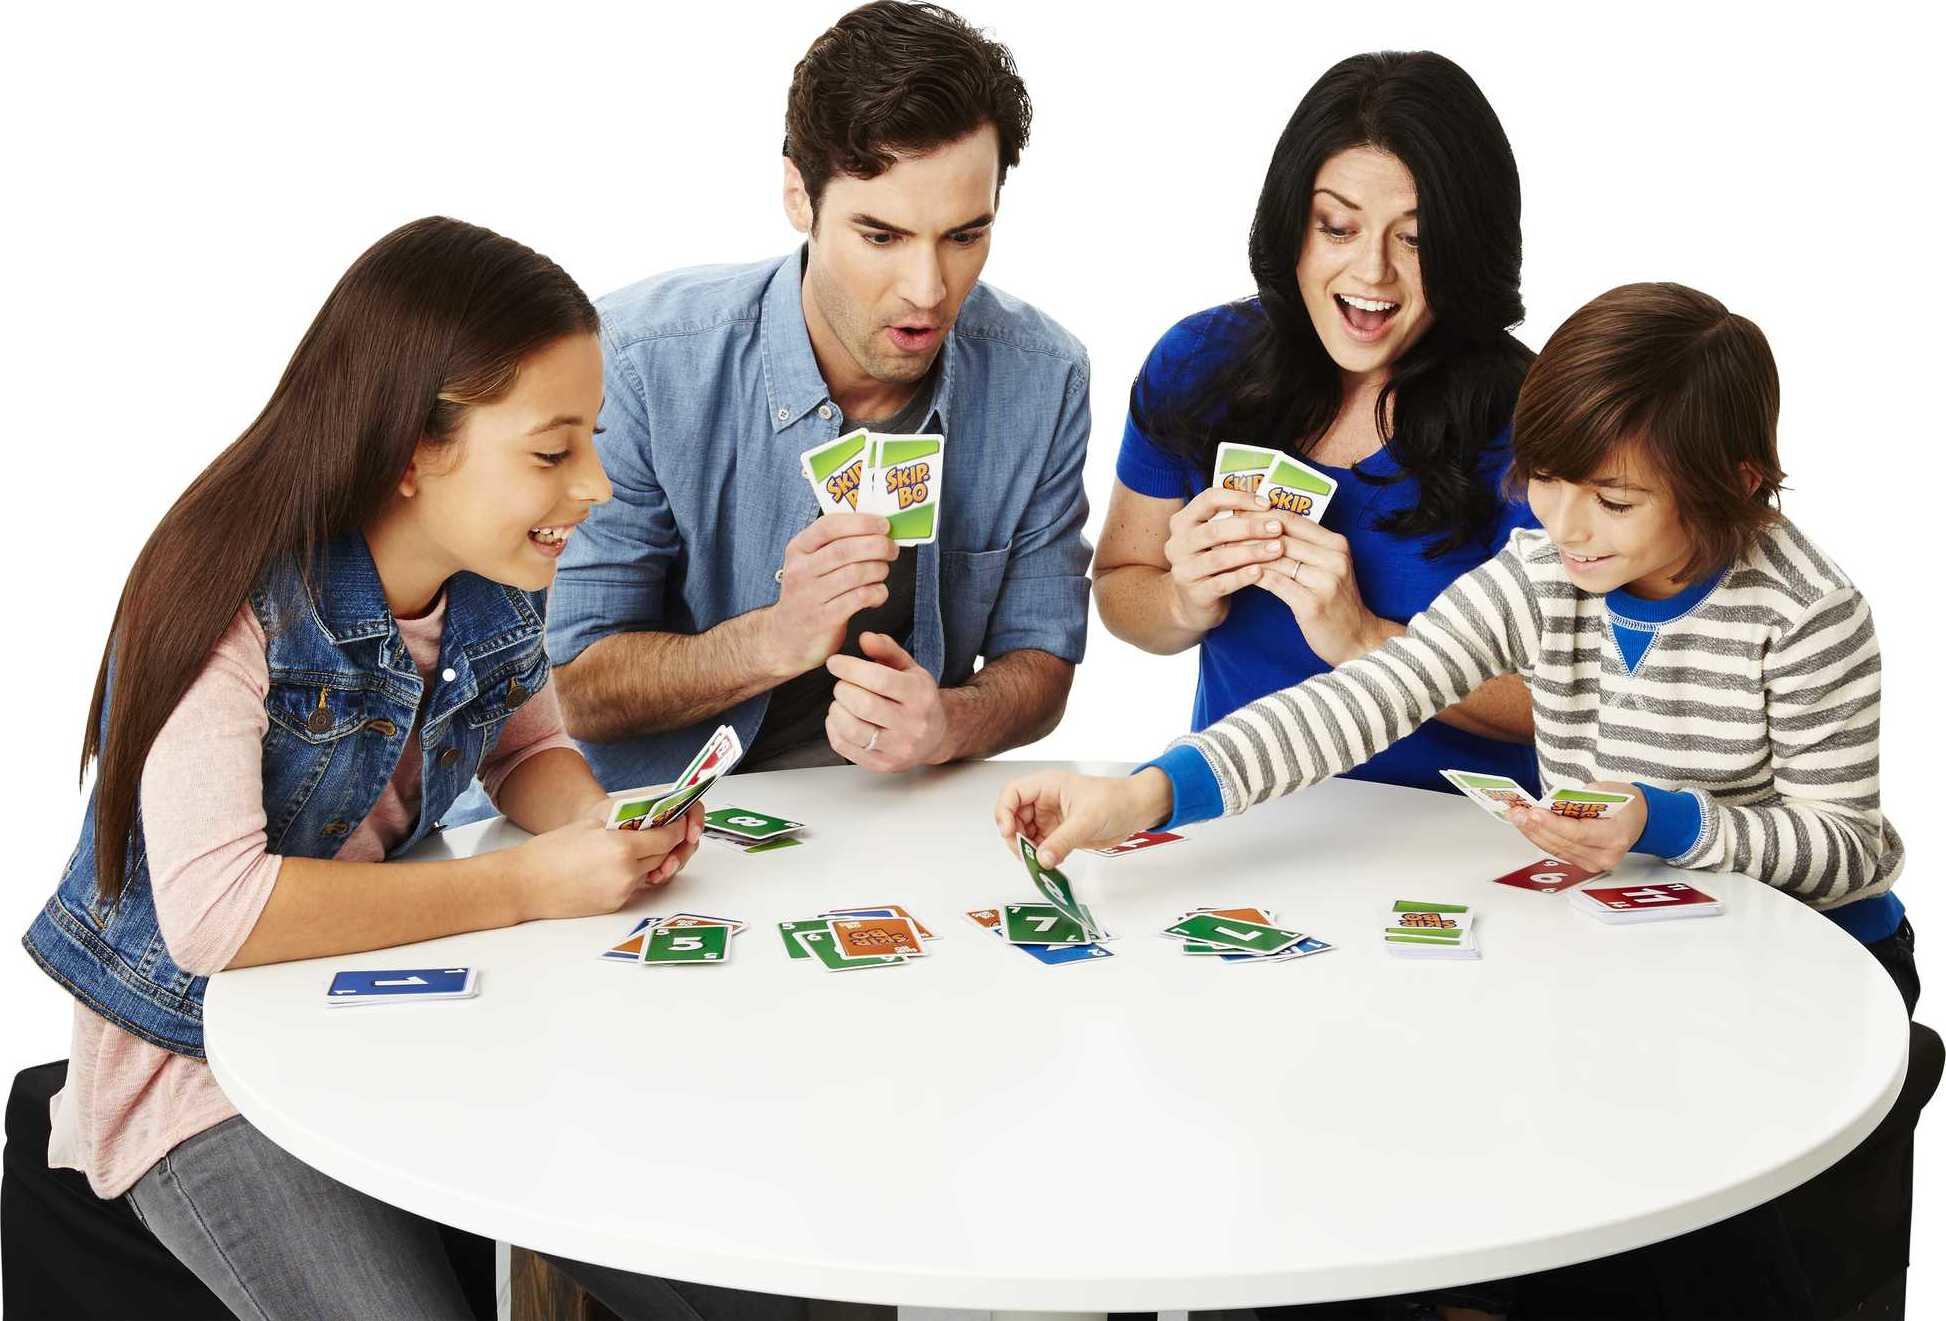 Skip-Bo Card Game for Kids, Adults & Game Night, Play Numbers in Order, 2 to 6 Players - image 3 of 6